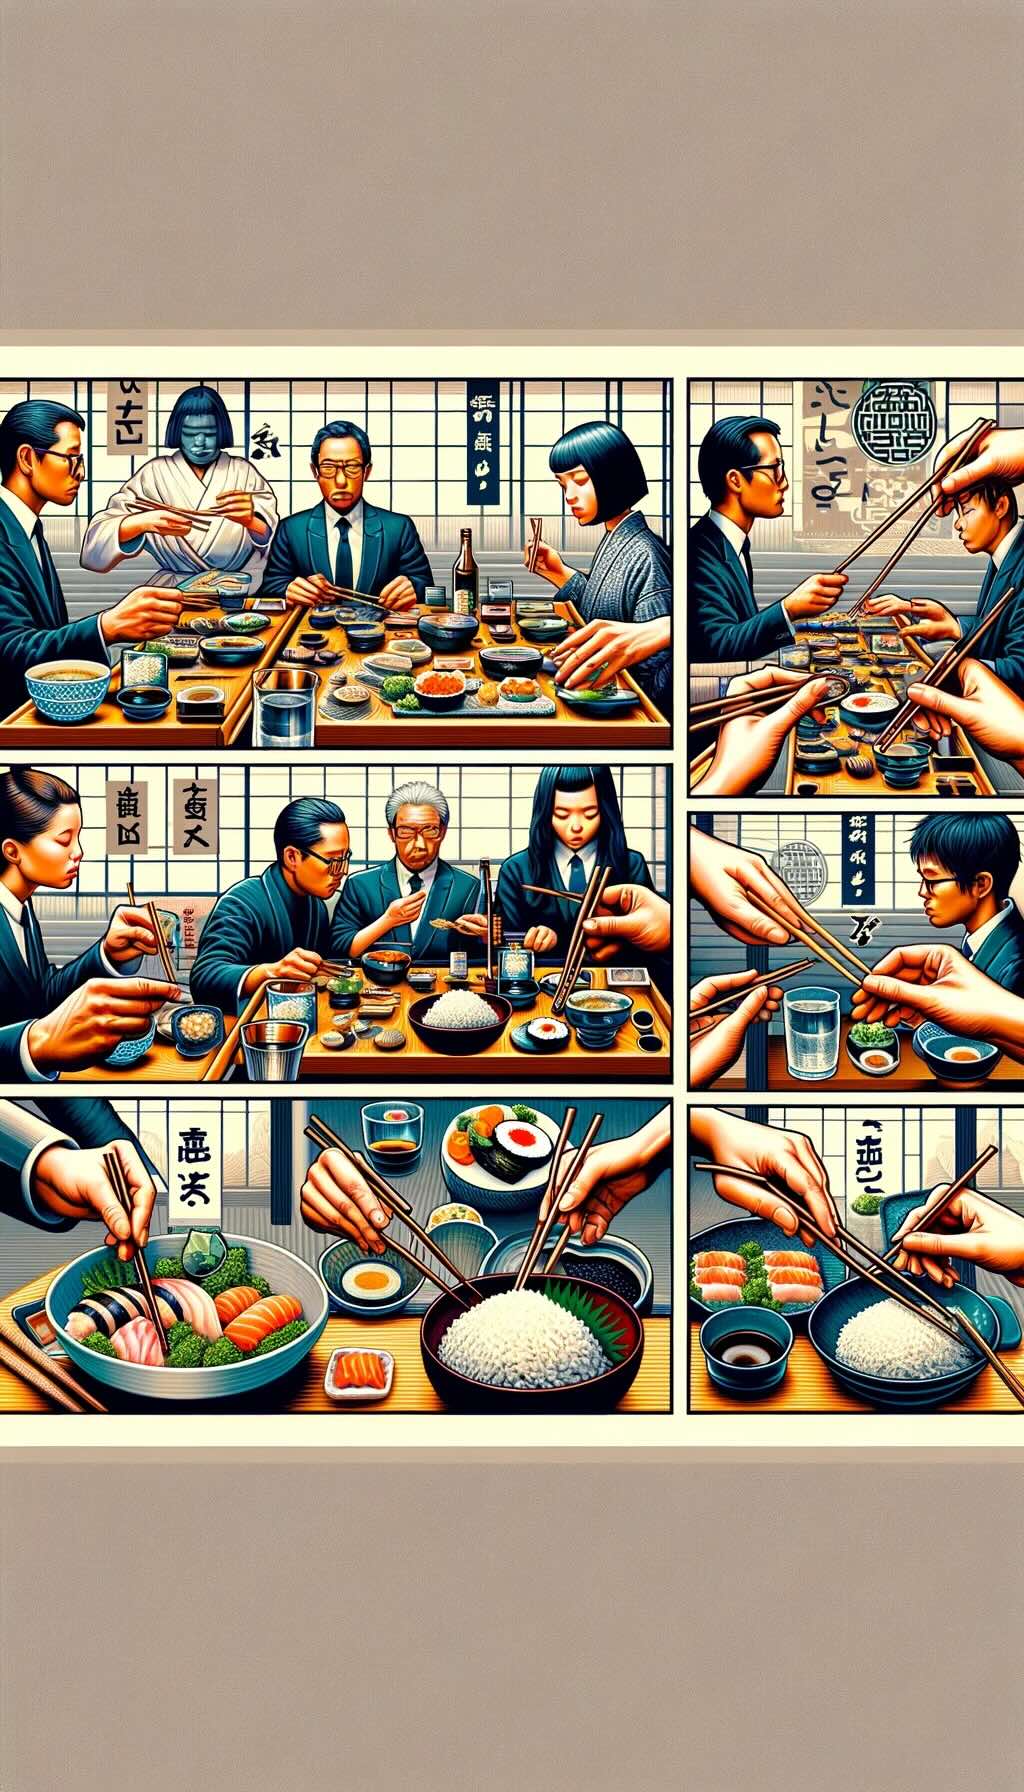 Various taboos in Japanese dining etiquette, scene captures the cultural significance and depth of these dining practices in Japan, emphasizing the importance of respecting these norms.